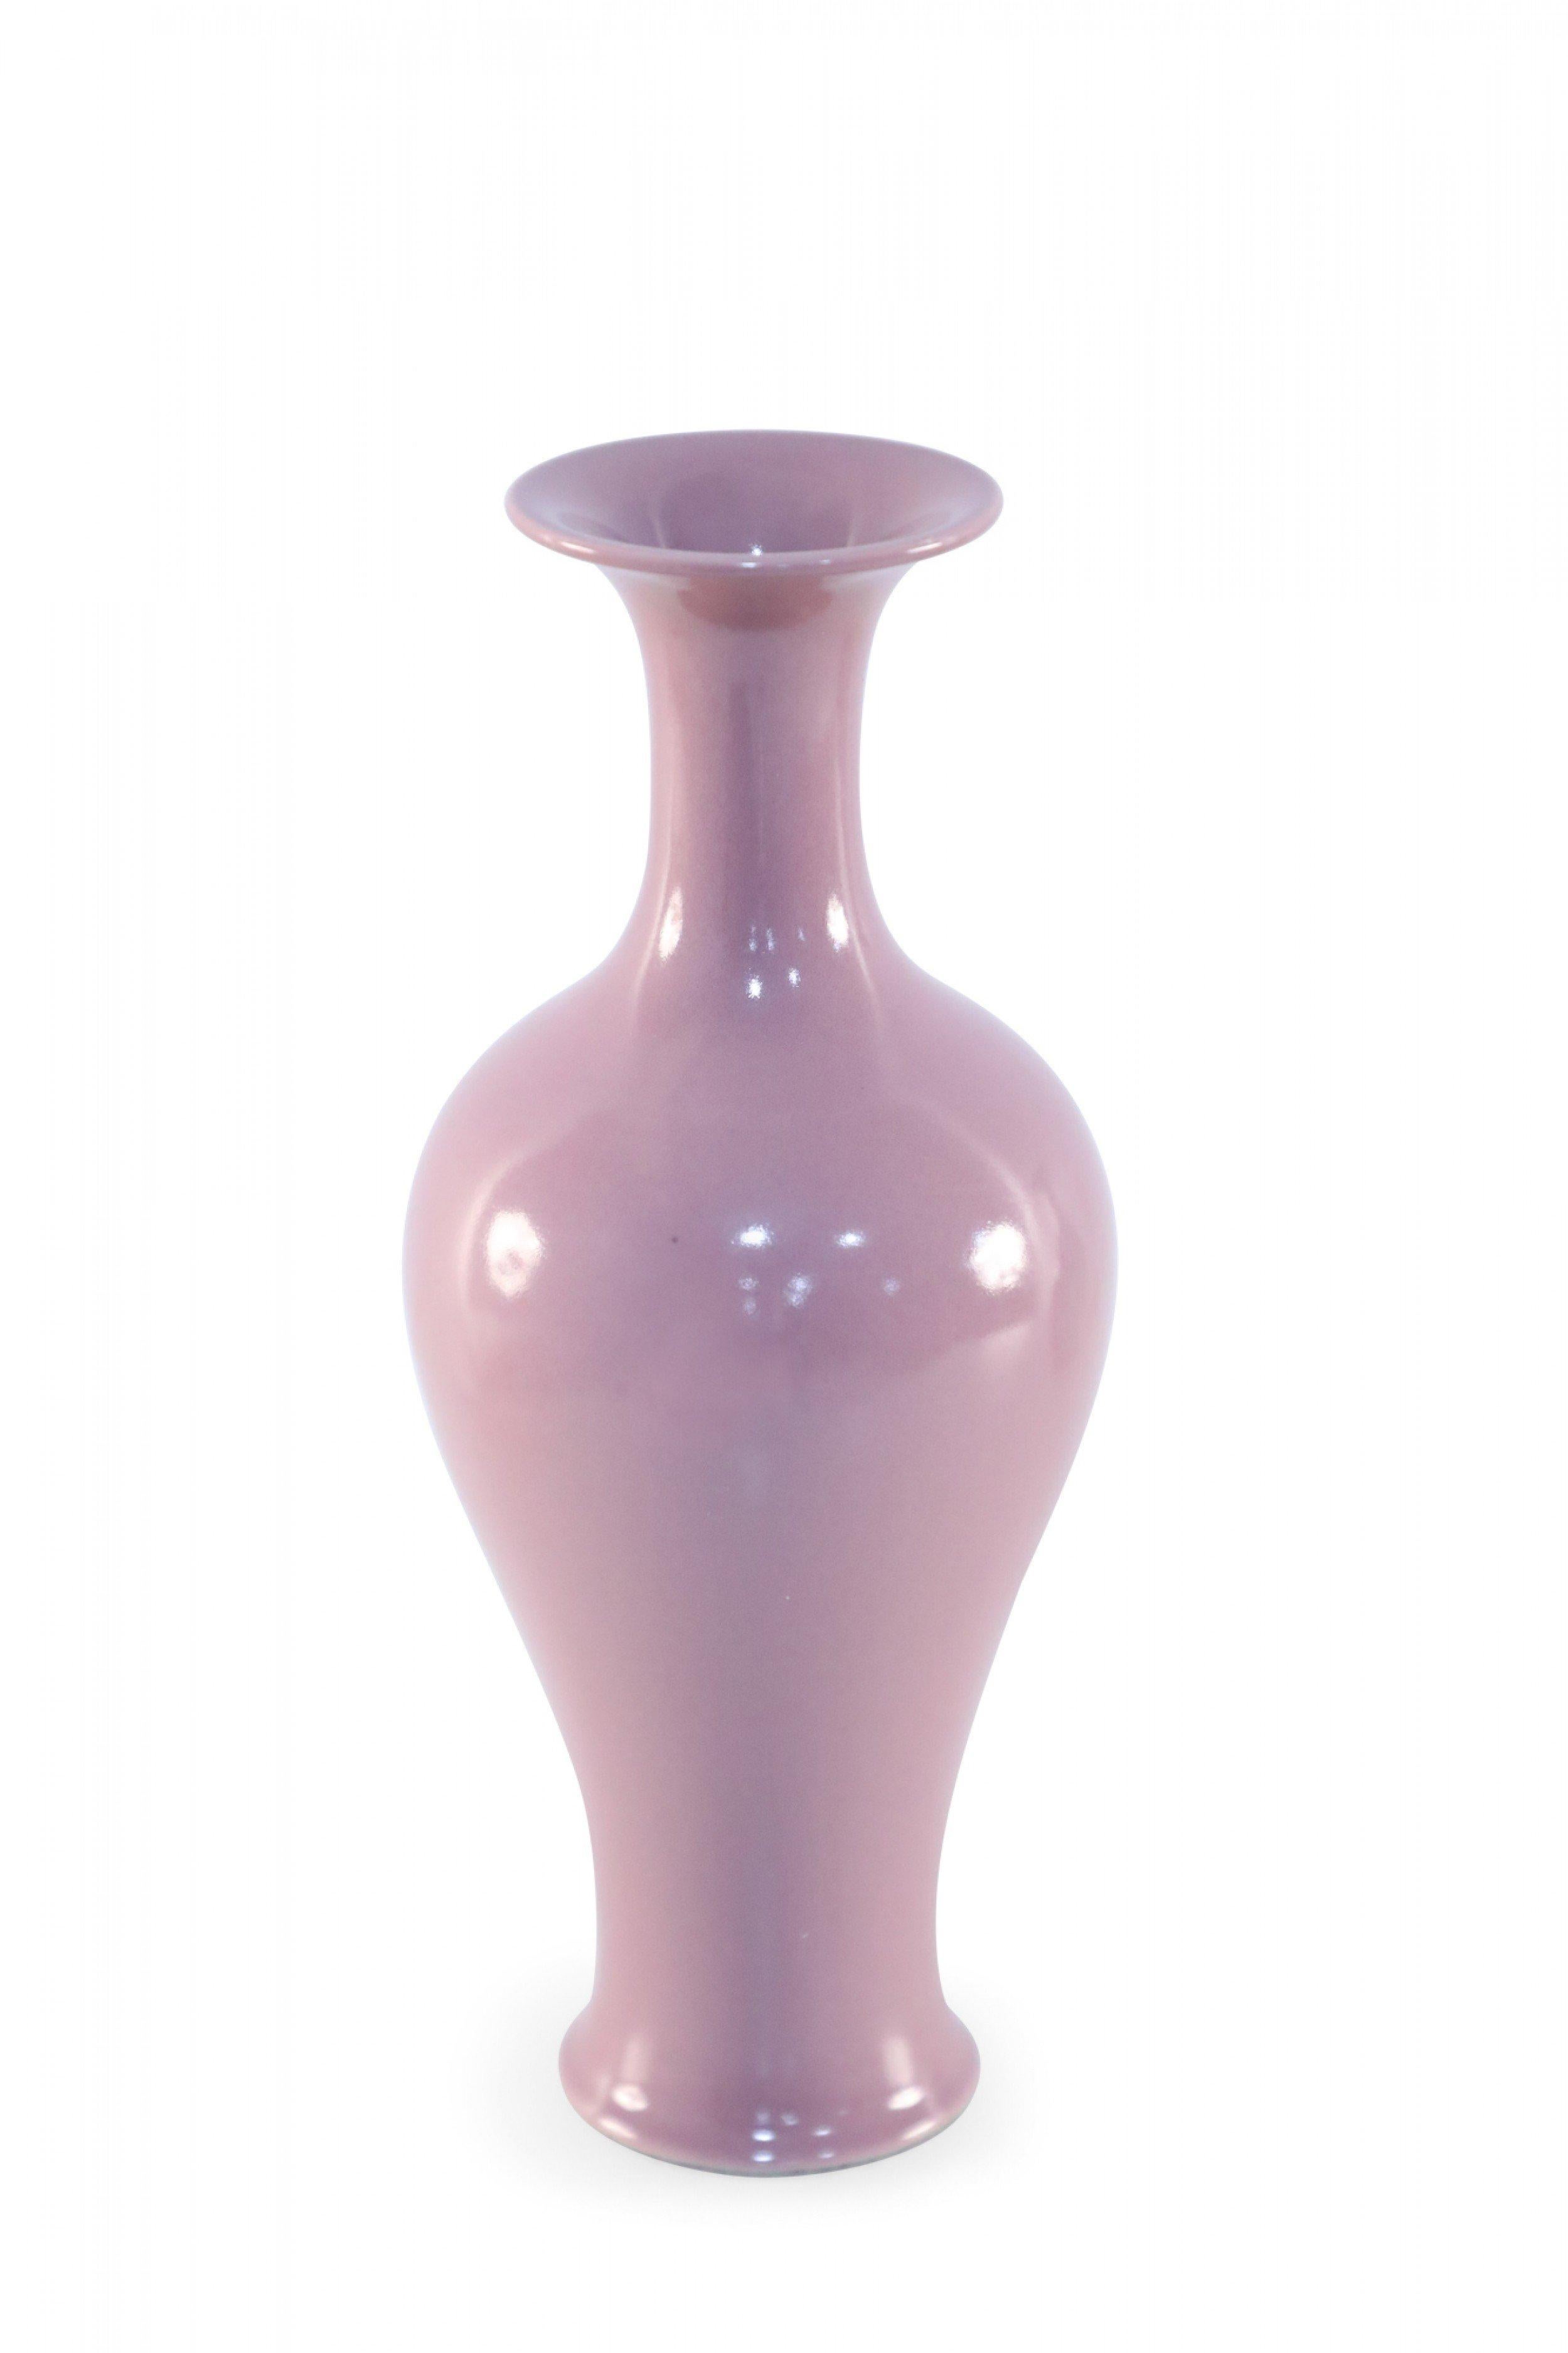 Chinese tall glazed porcelain vase in an elegant mauve shade (date mark on bottom, see photos).
     